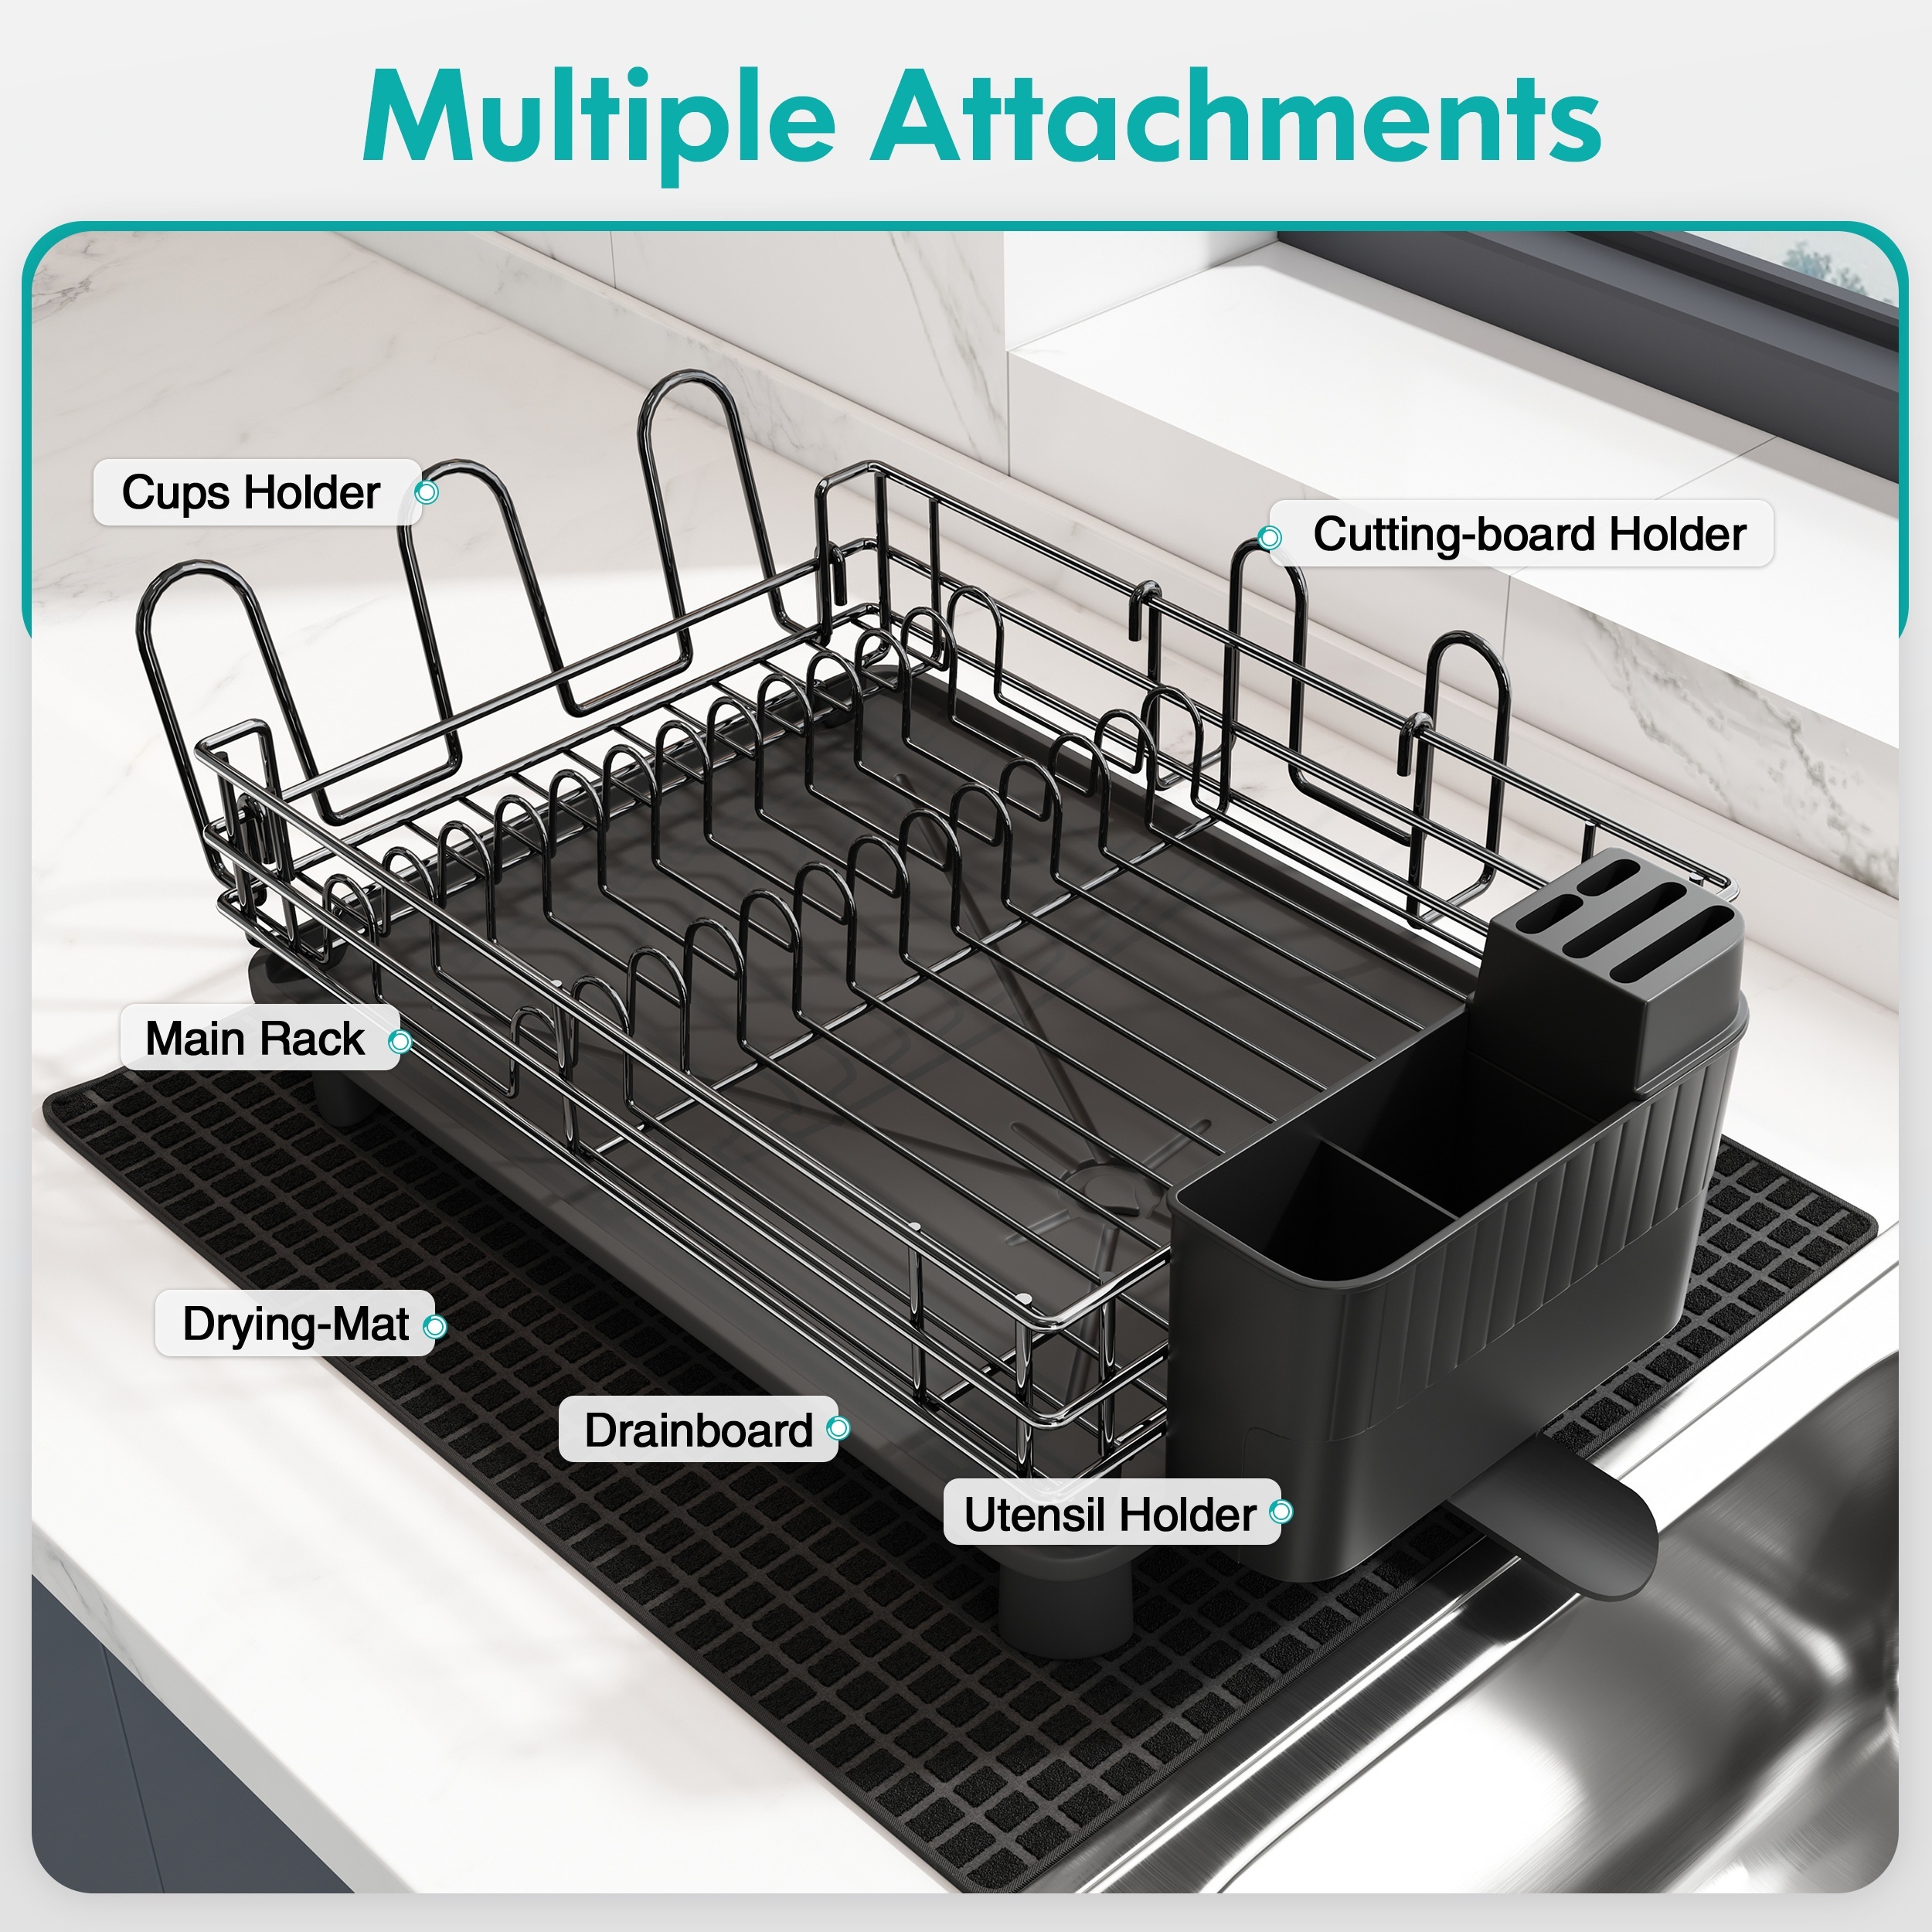 Dish Drying Rack for Kitchen Counter, MAJALIS 2 Tier Large Dish Drainers  with Drainboard Set and Utensil Holder, Dish Dryer Strainer (Black,  Stainless Steel) 